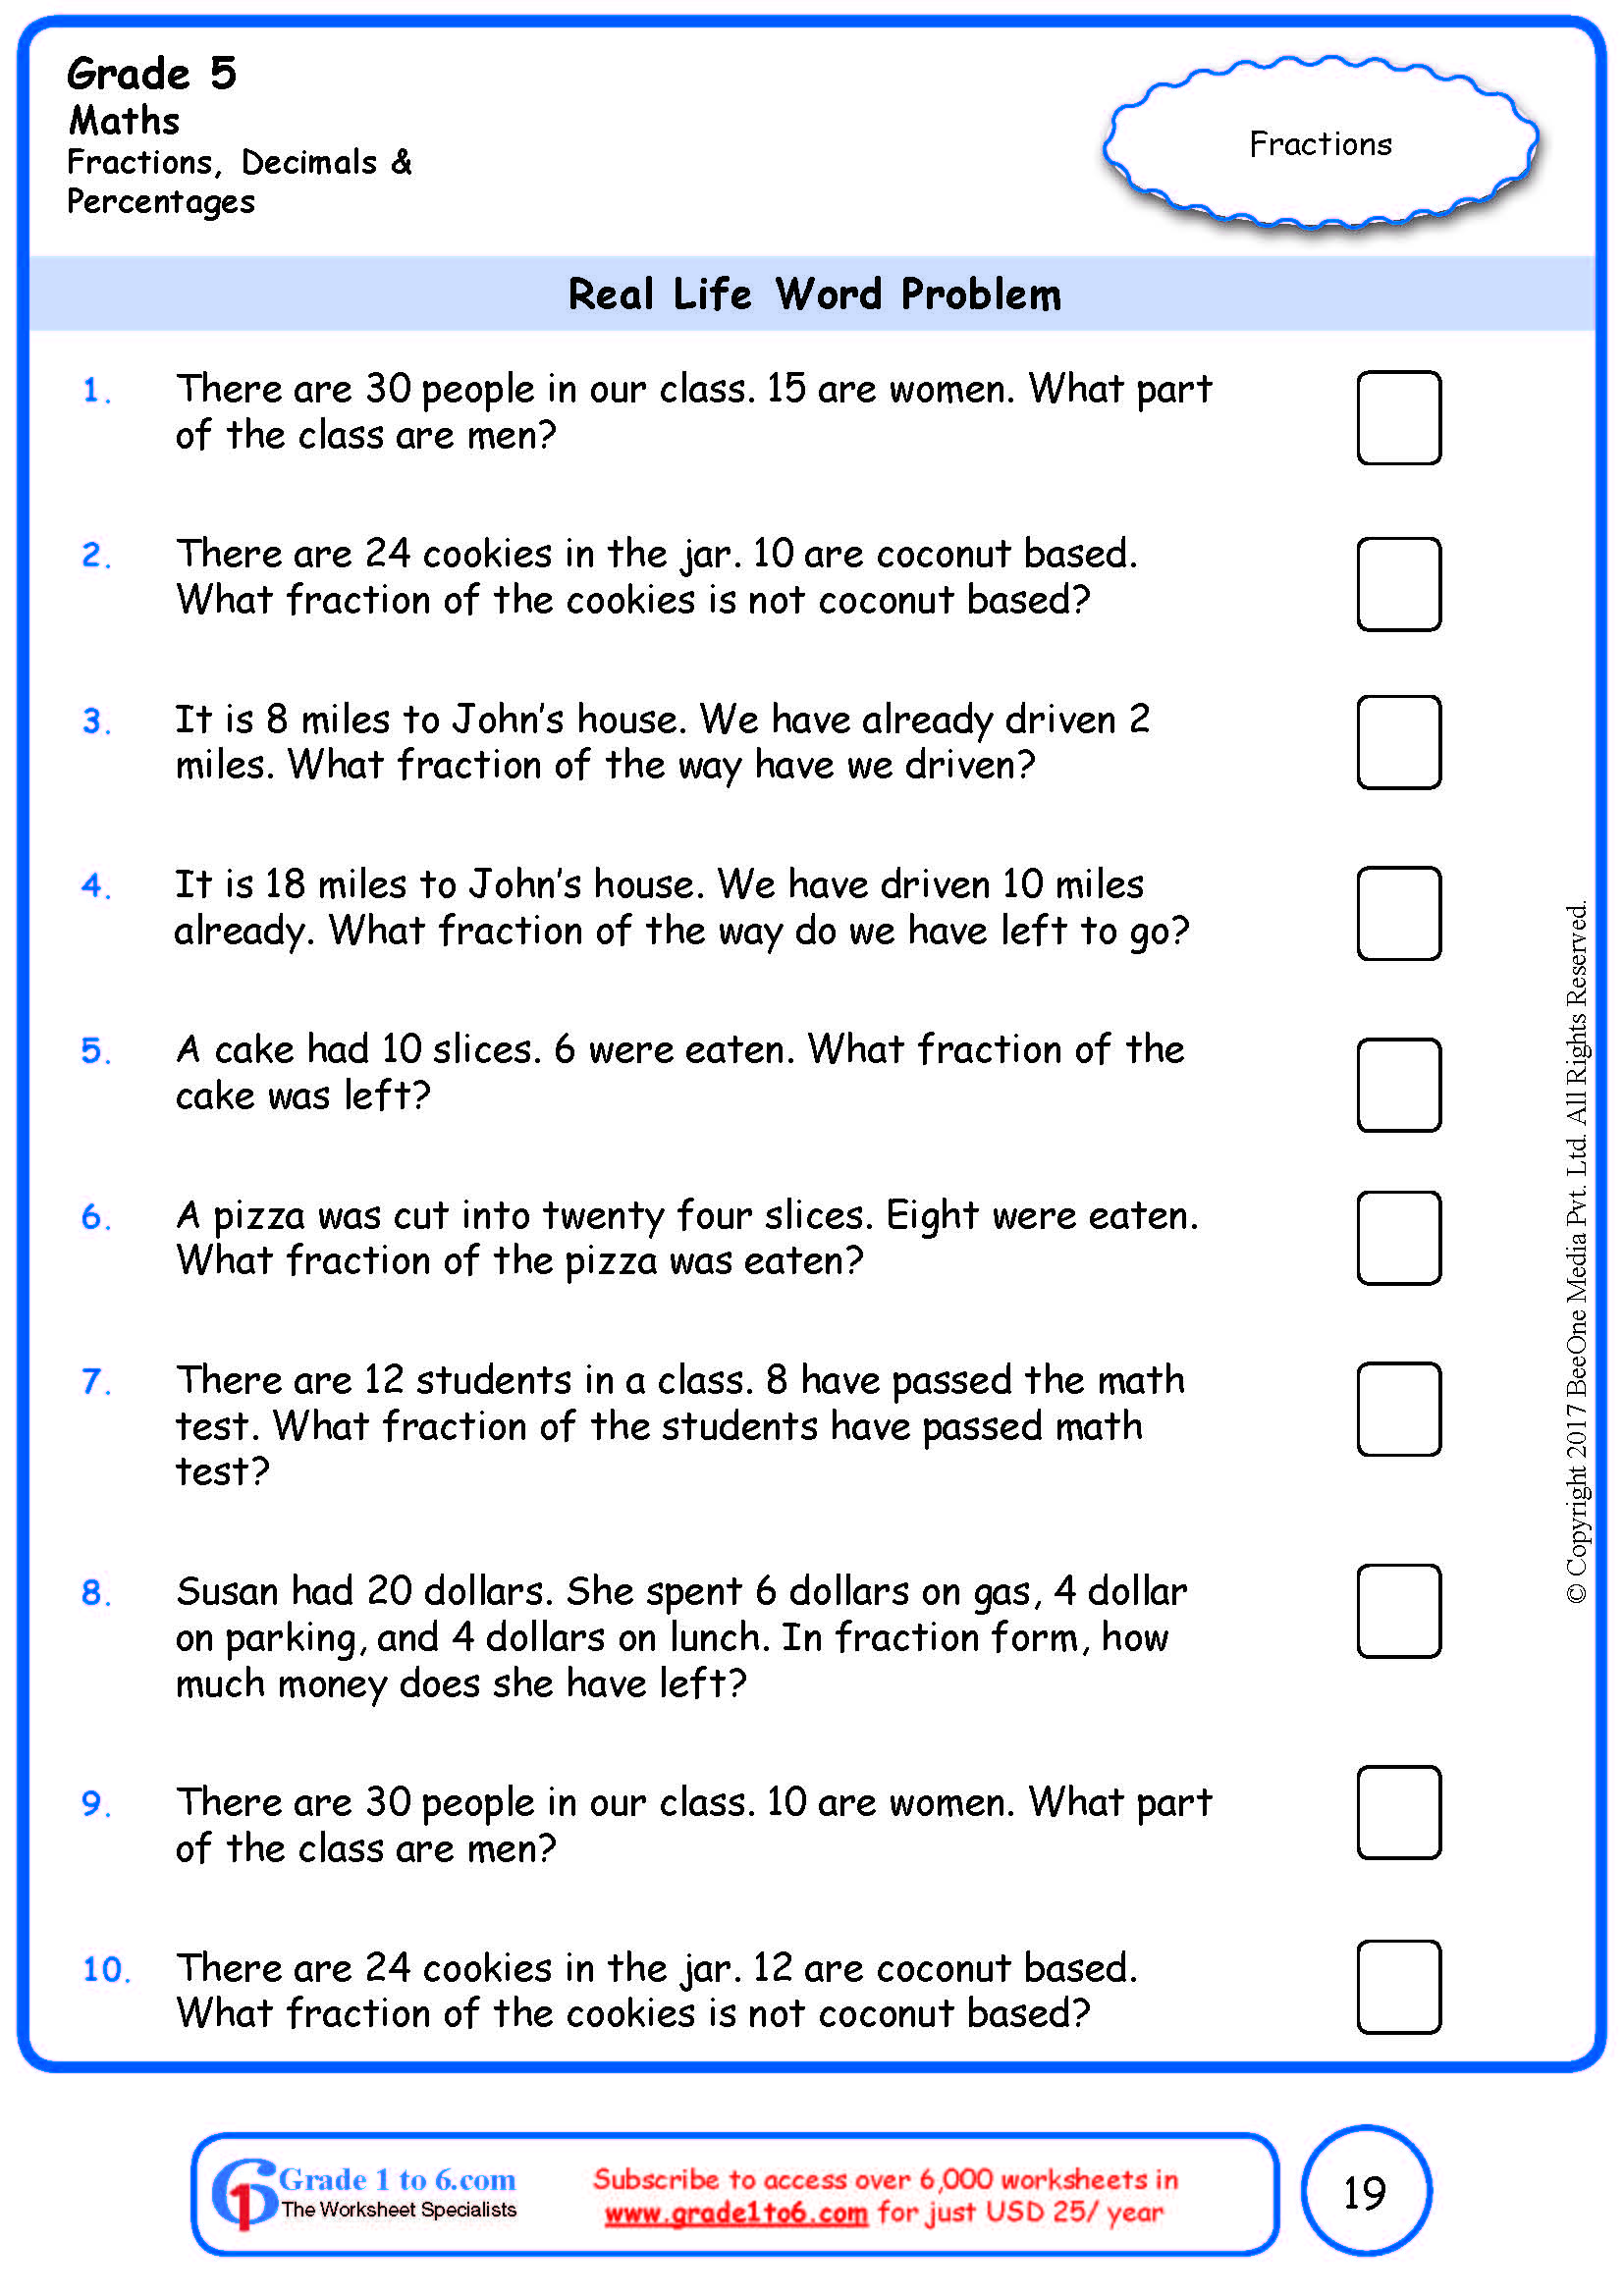 Maths Worksheets For Grade 1 Word Problems High Quality Maths Worksheets For Children Ages 5